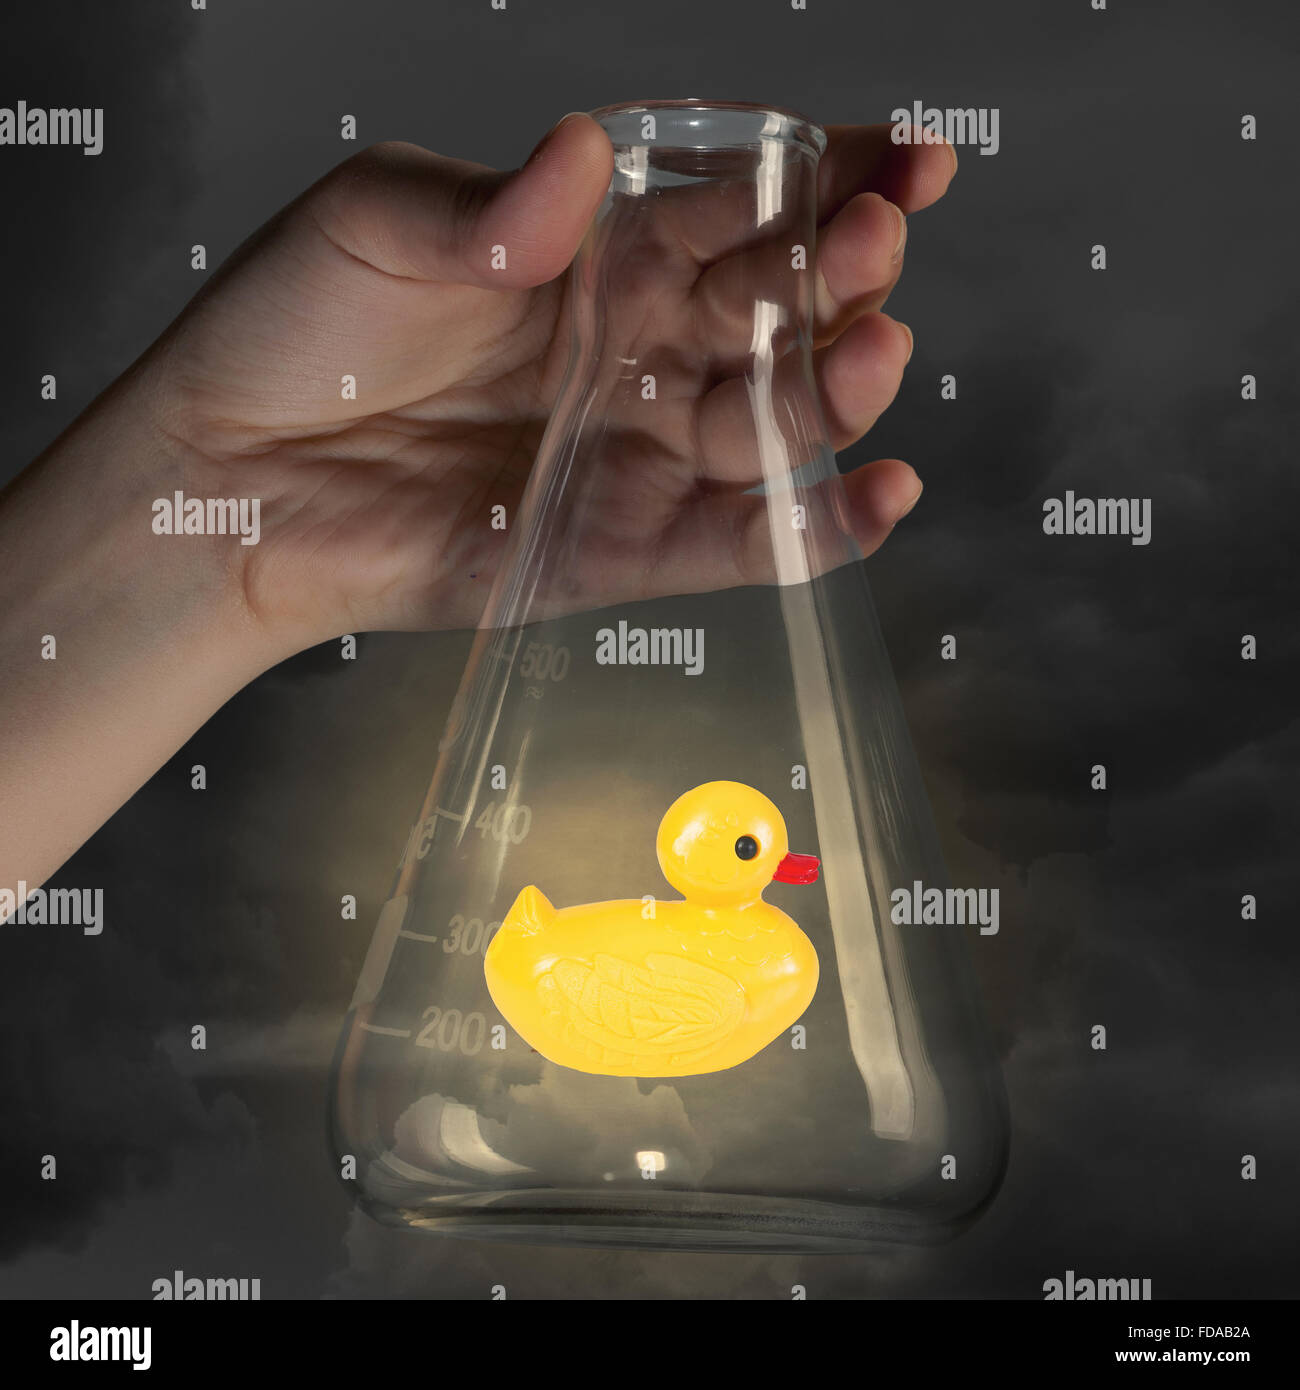 Human hand holding glass tube with yellow rubber duck toy Stock Photo